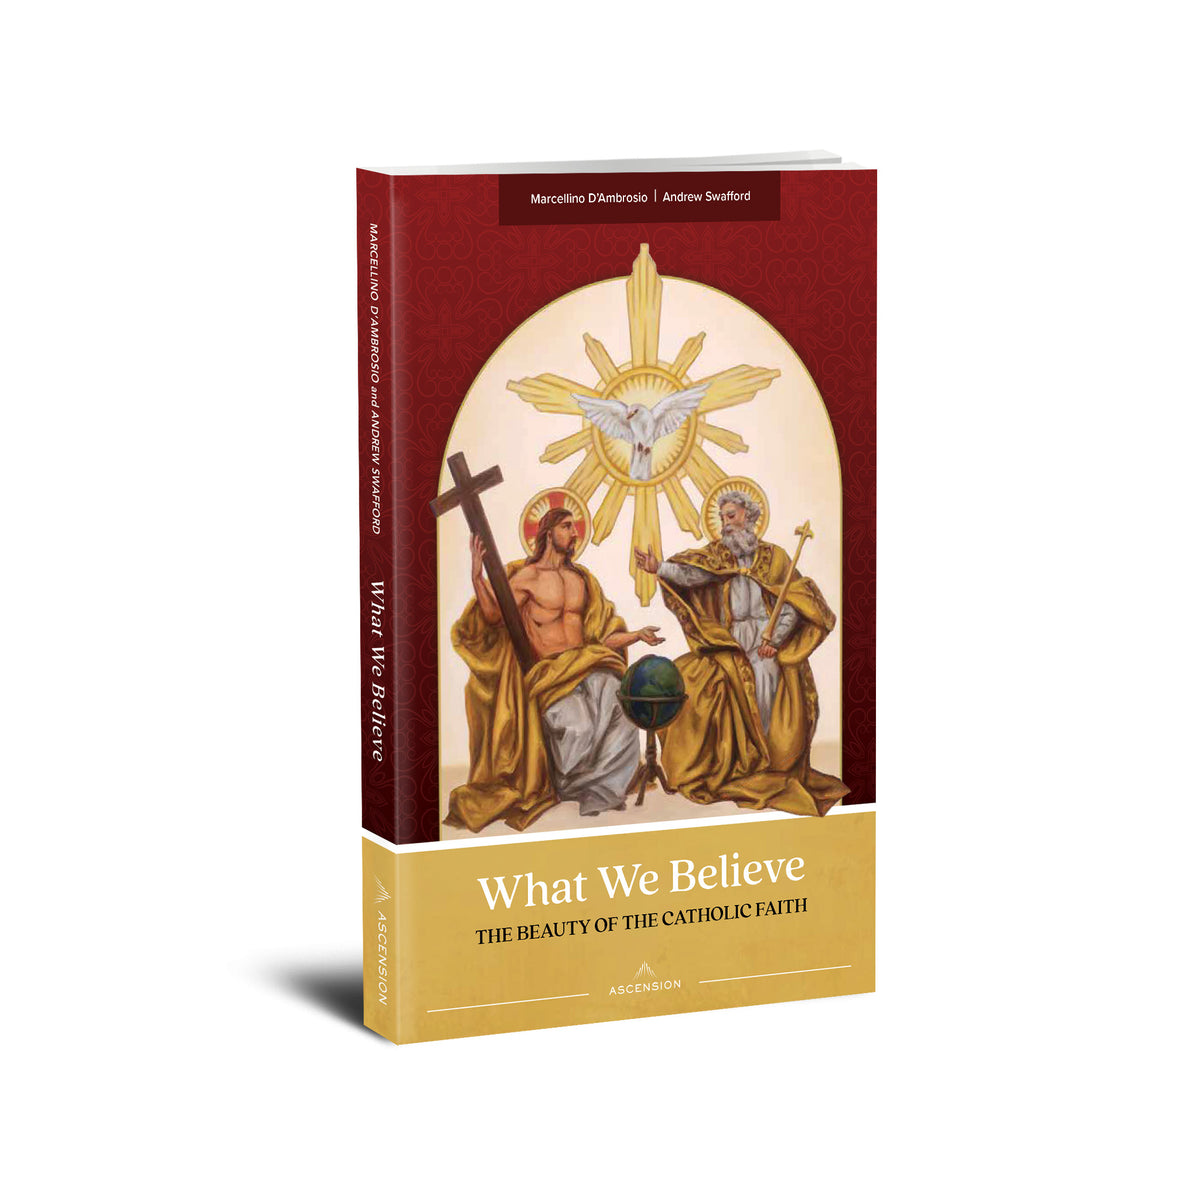 This We Believe: Exploring the Essential Texts of the Christian Faith